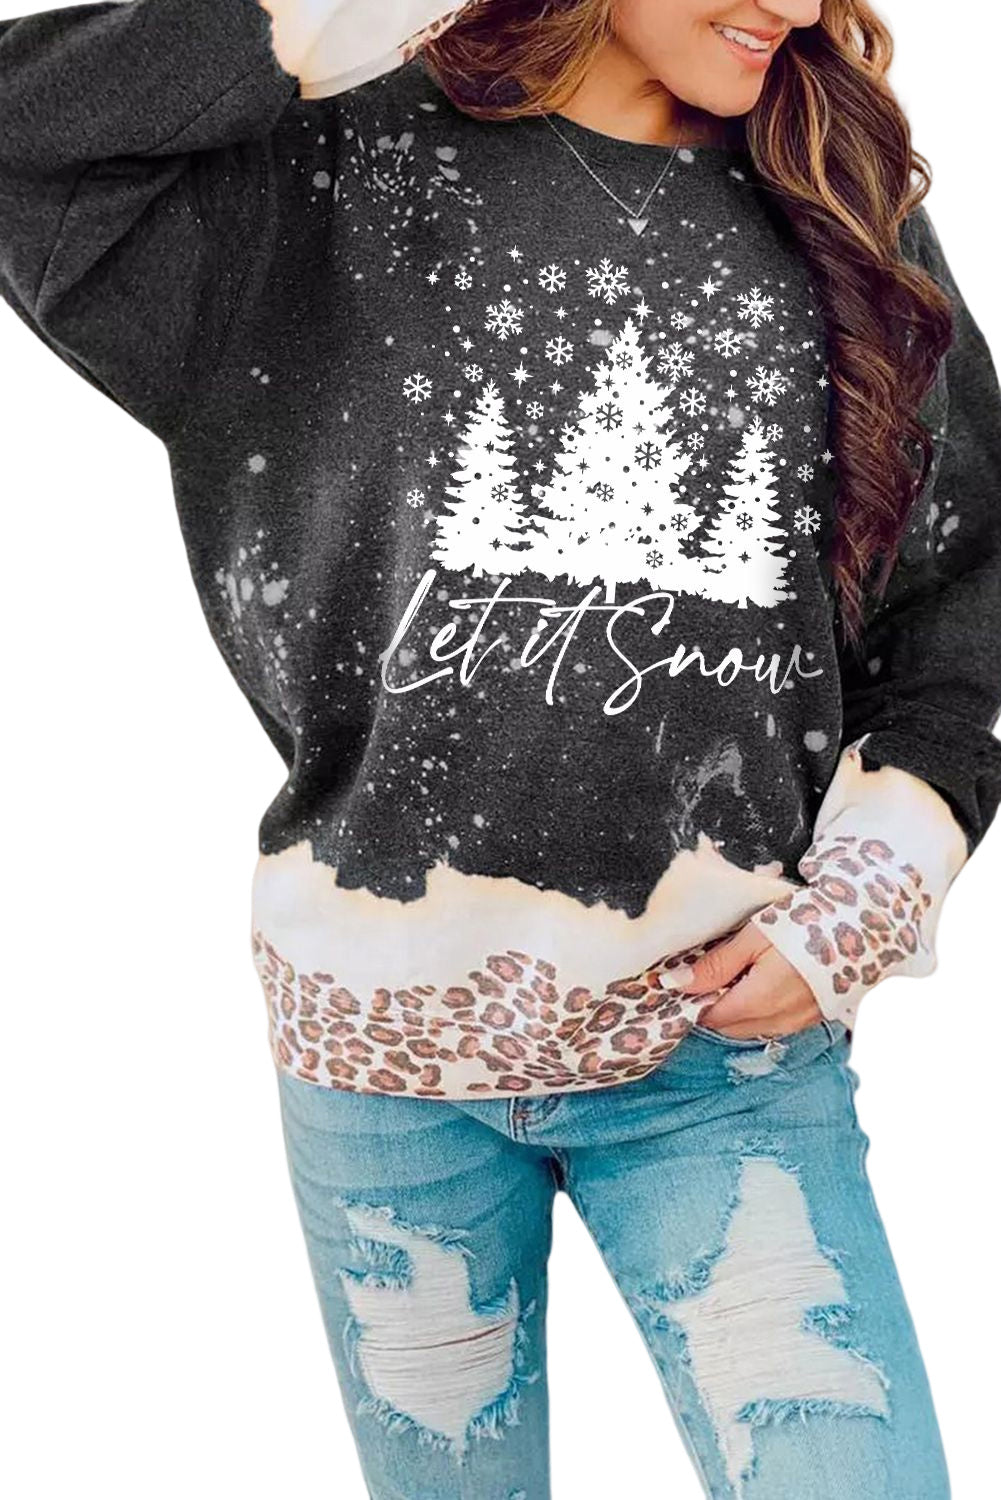 LC25313542-2-S, LC25313542-2-M, LC25313542-2-L, LC25313542-2-XL, LC25313542-2-2XL, Black Leopard Snowy Christmas Bleached T Shirt Fall Pullover Tops